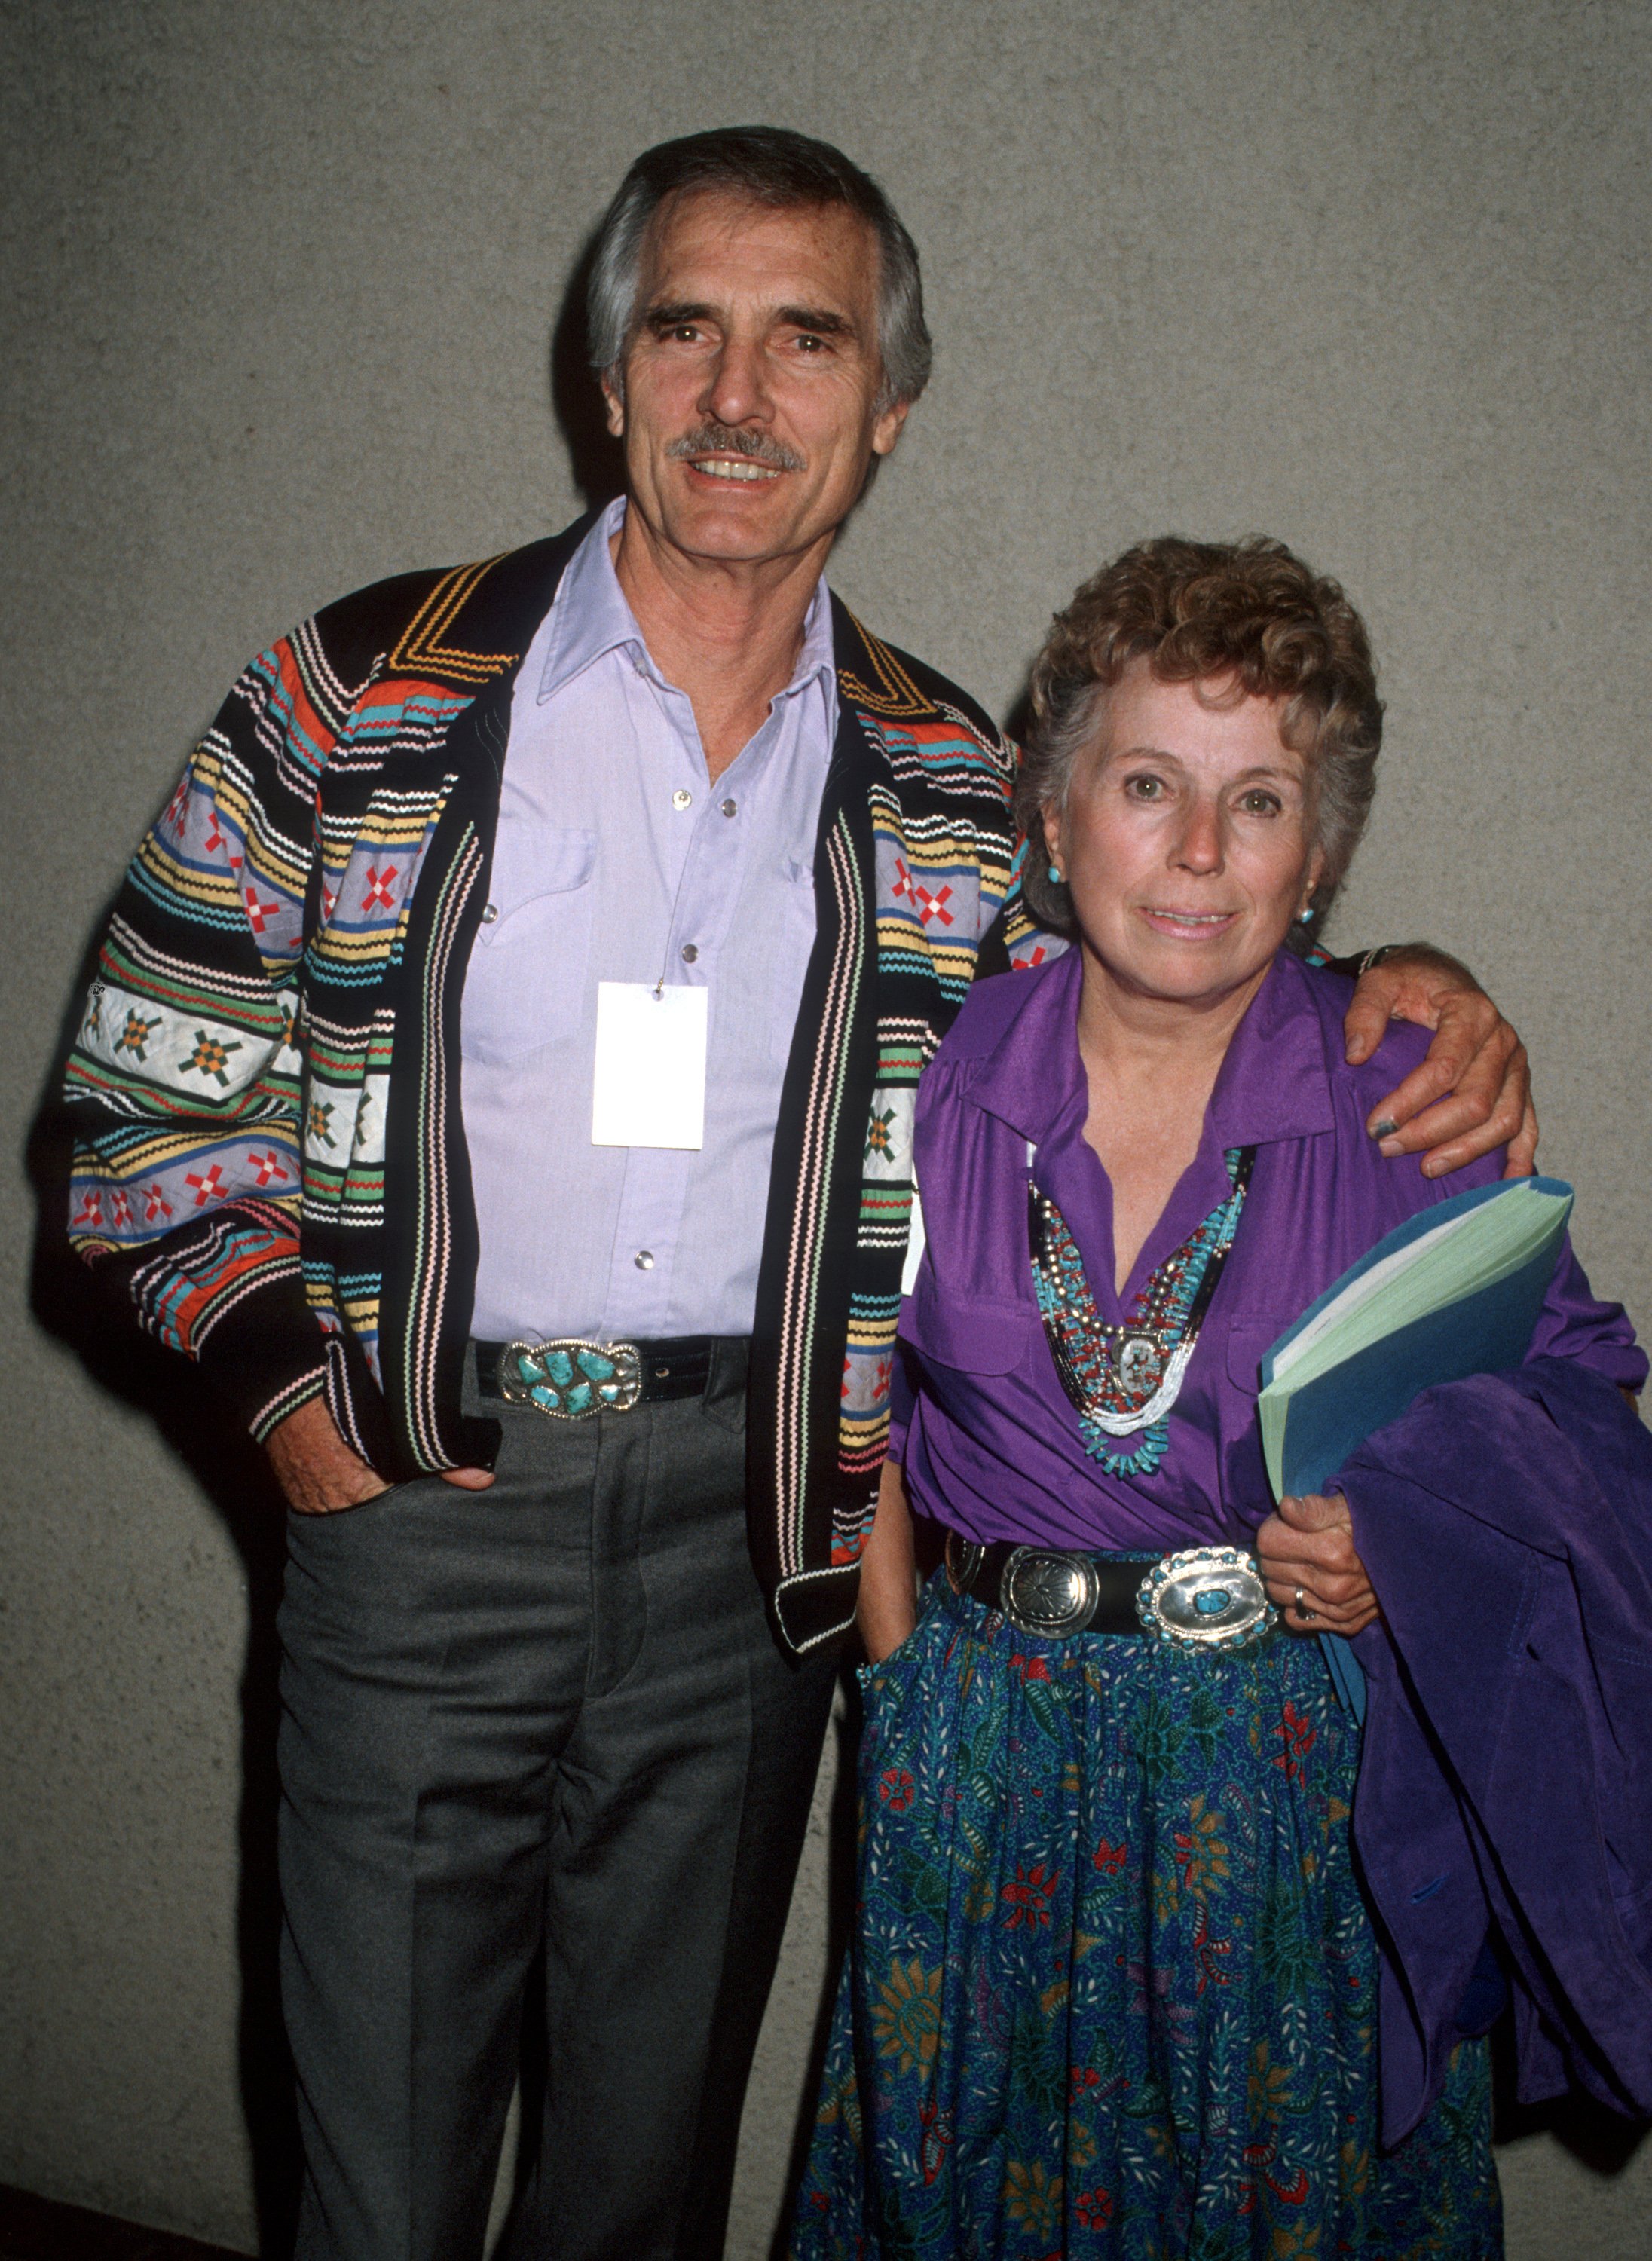 Dennis Weaver and Gerry Stowell during "Country Christmas with L.I.F.E." 1989 concert at Universal City Ampitheater in Universal City, California. / Source: Getty Images